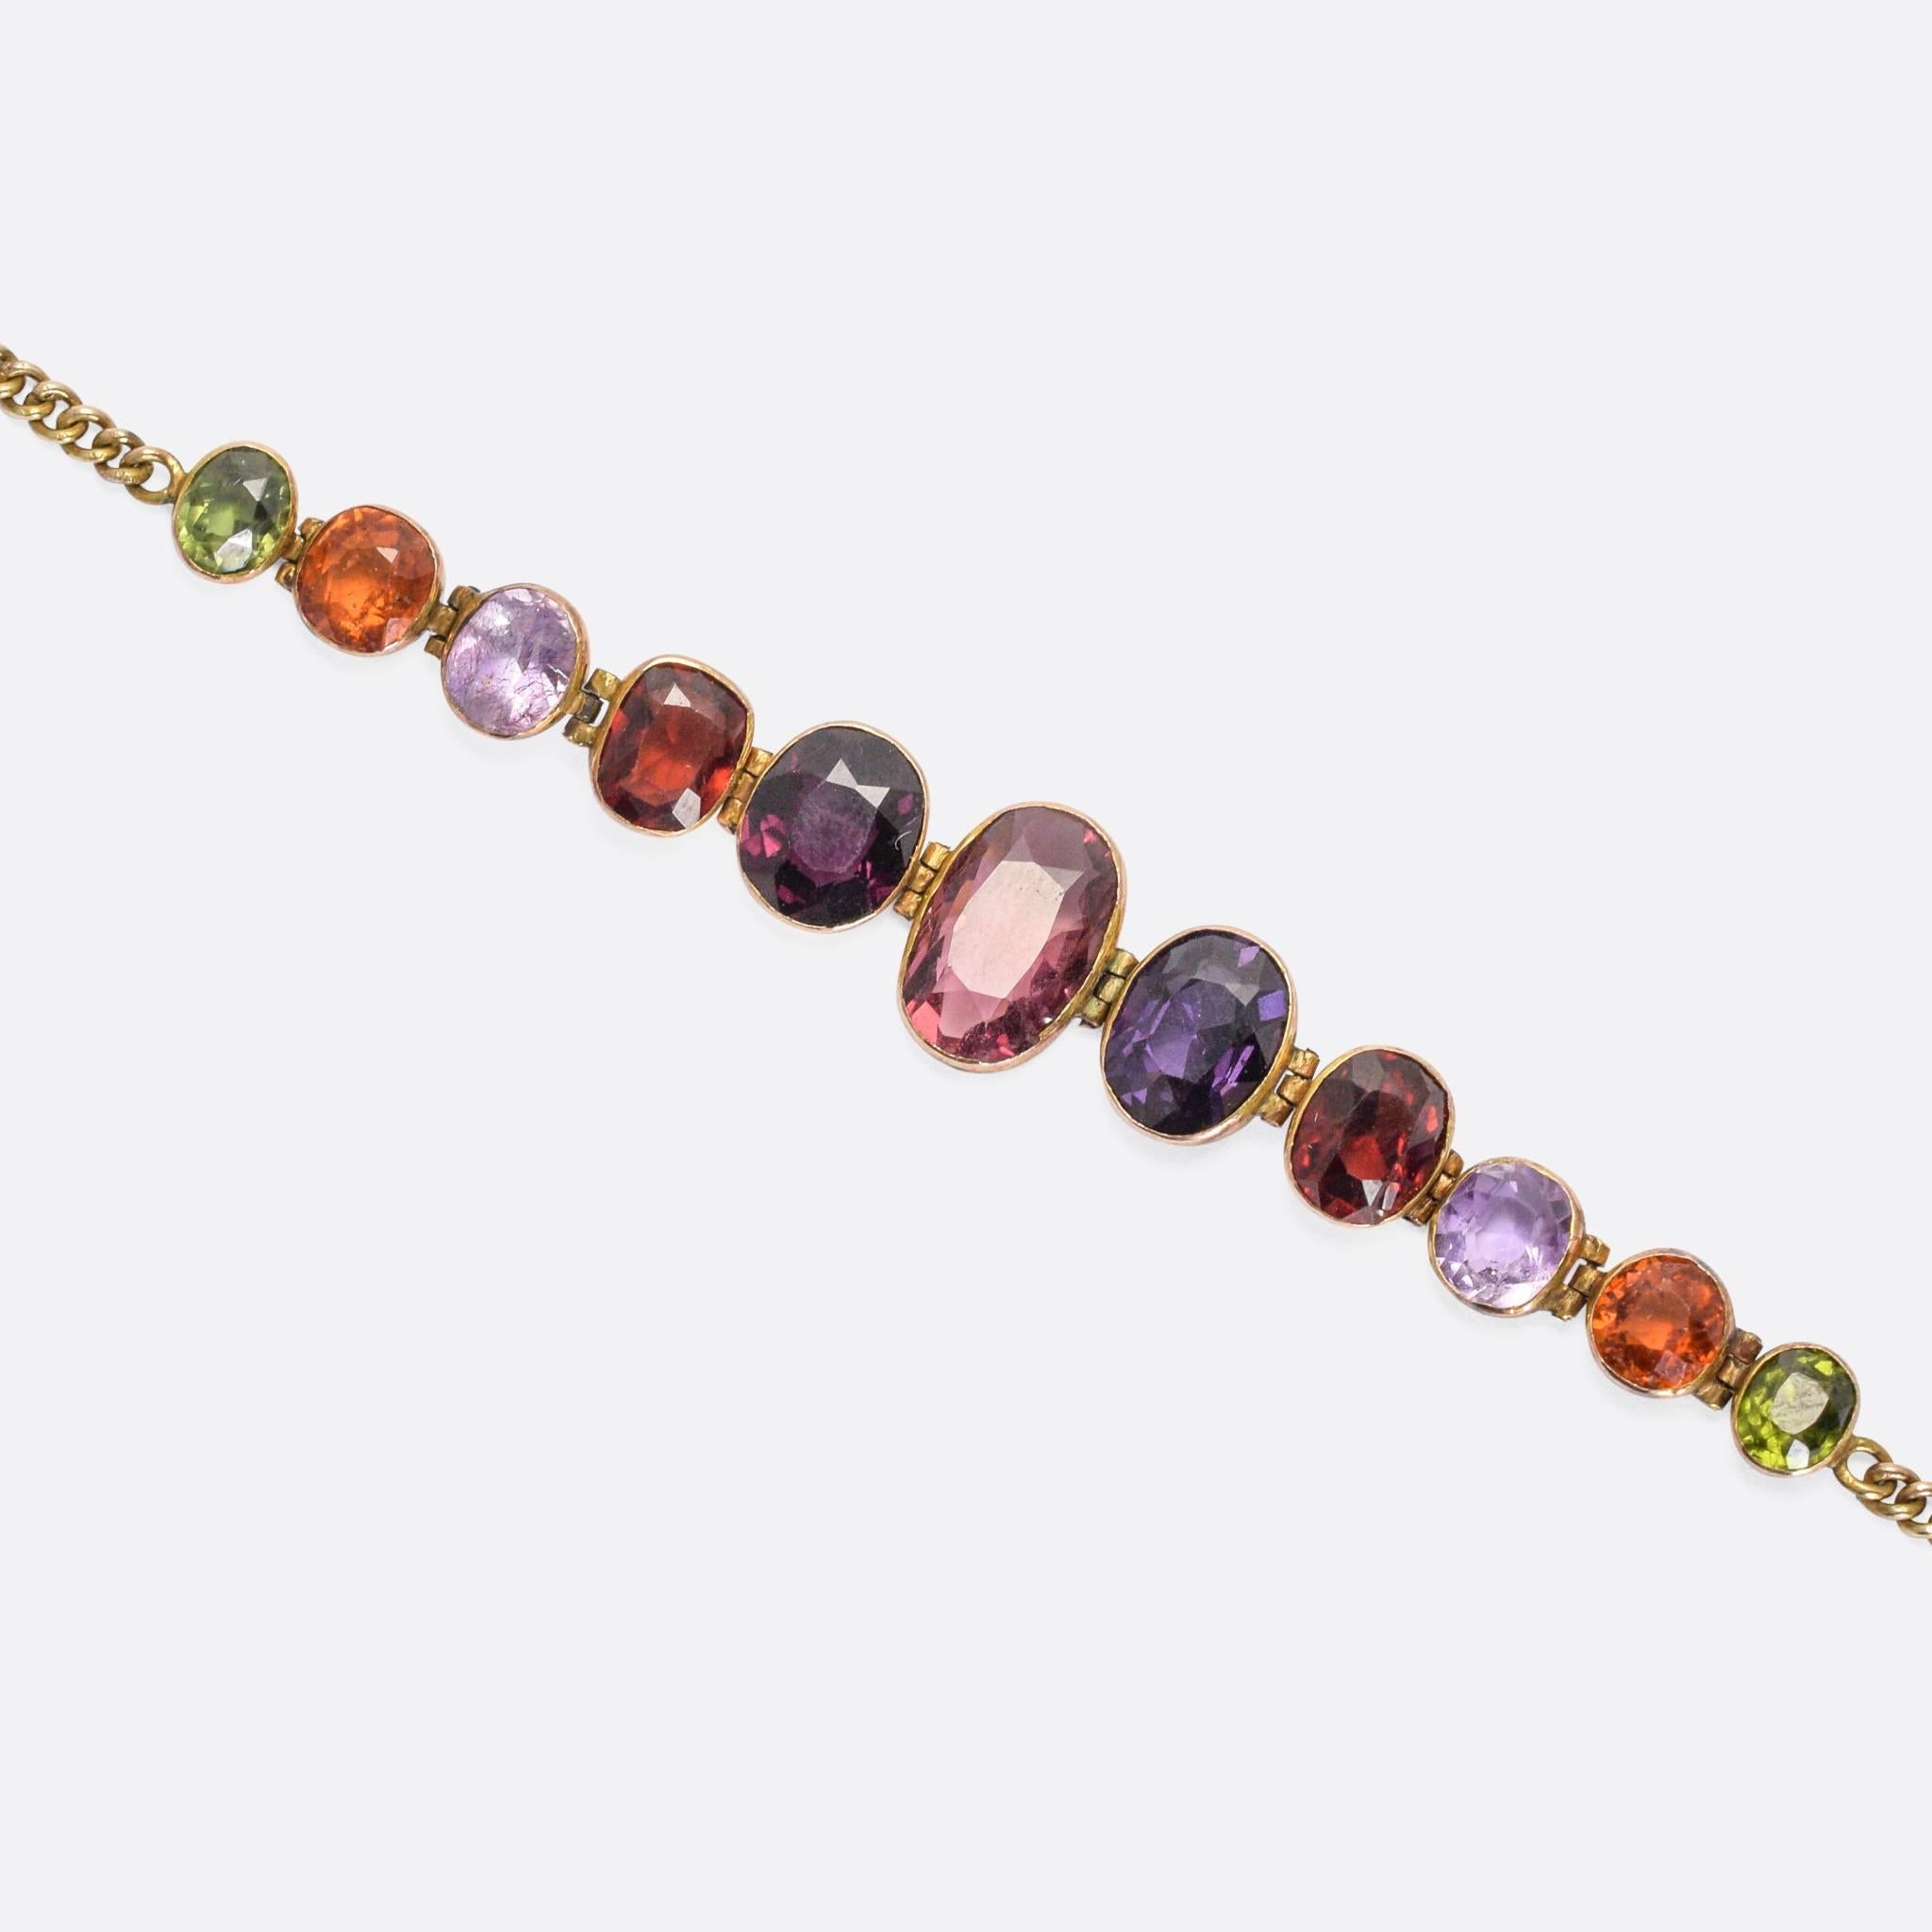 A superb antique multi-gem bracelet, dating to the turn of the 20th Century. A colourful collection of natural gemstones rest in fine collet settings, worked in 9 karat gold throughout. Each setting is individually hinged, allowing the faceted